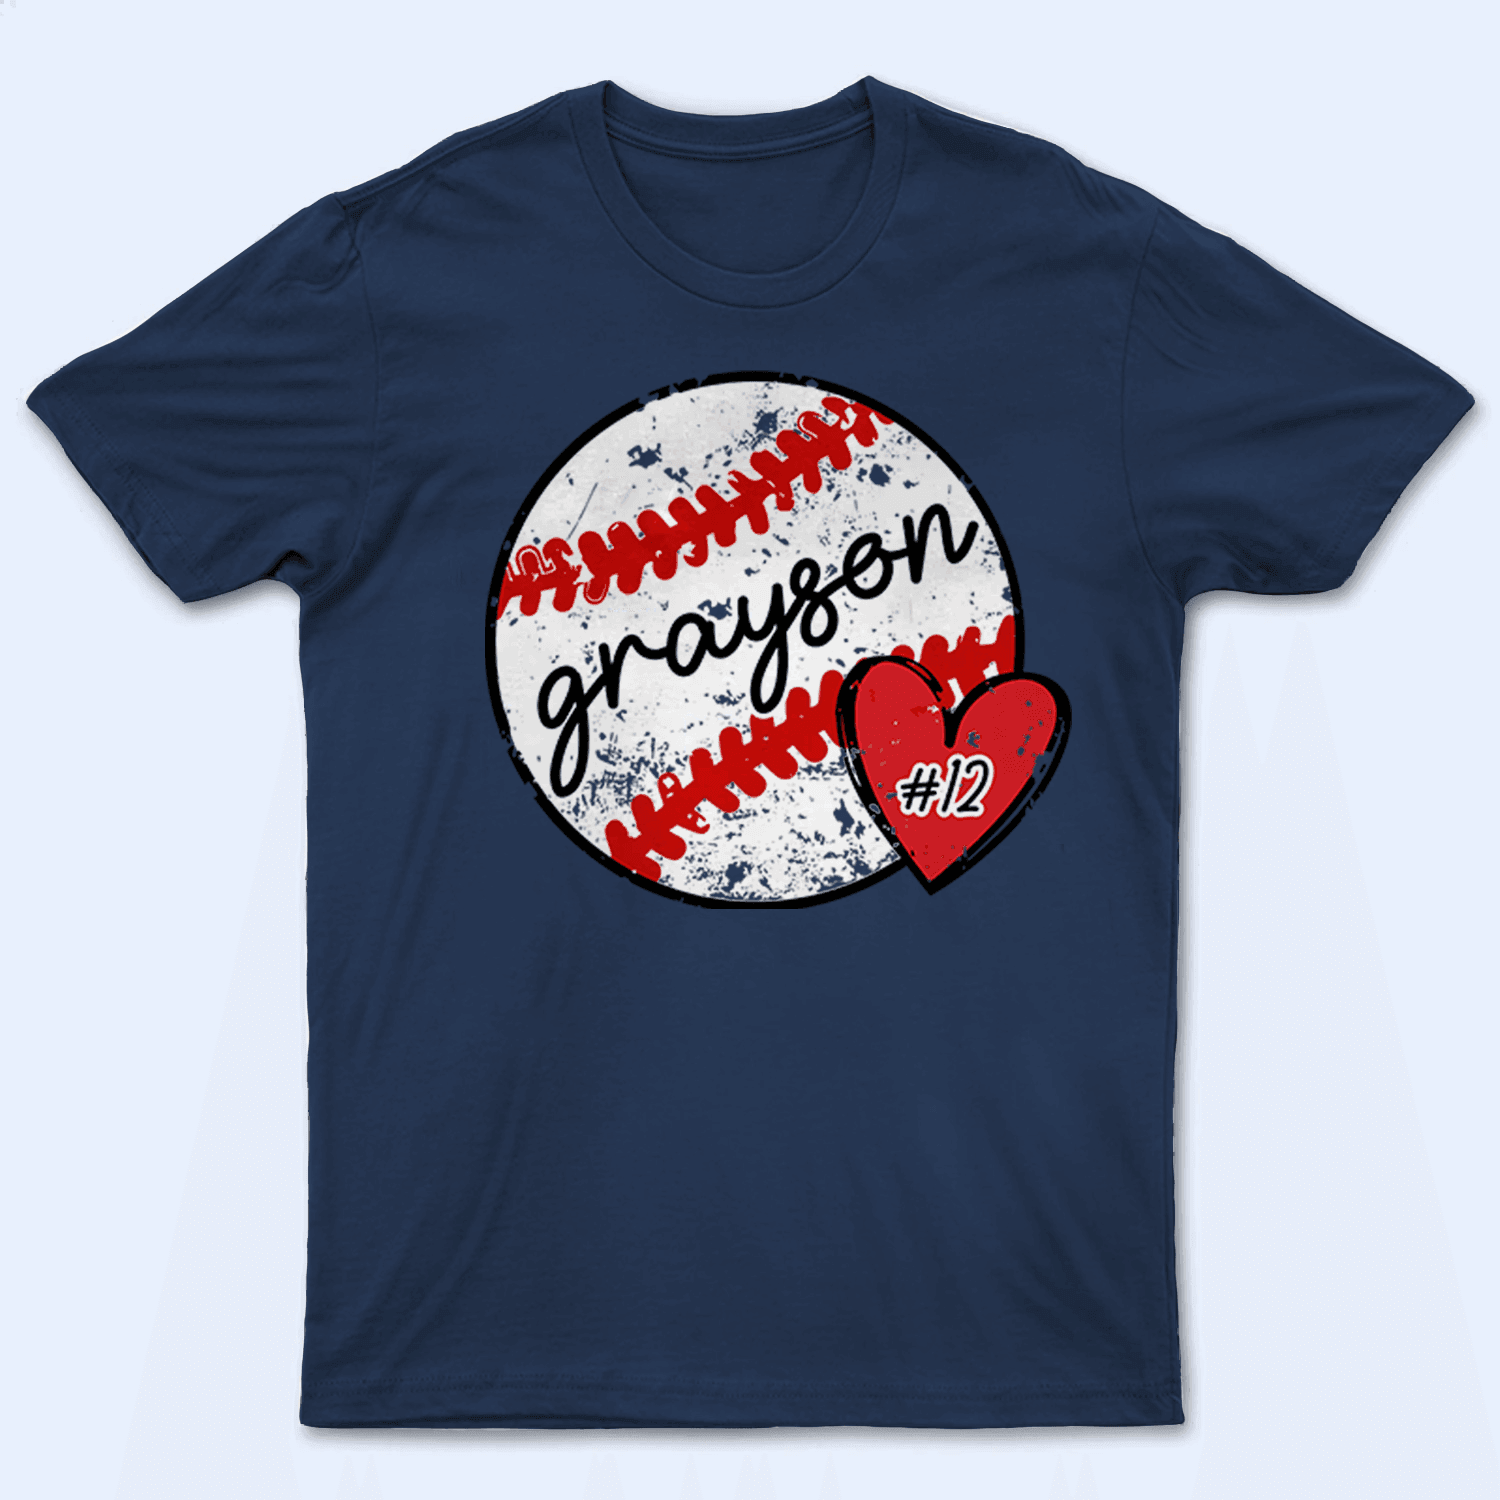 Houston Astros T-Shirt Liberty Astros Gift - Personalized Gifts